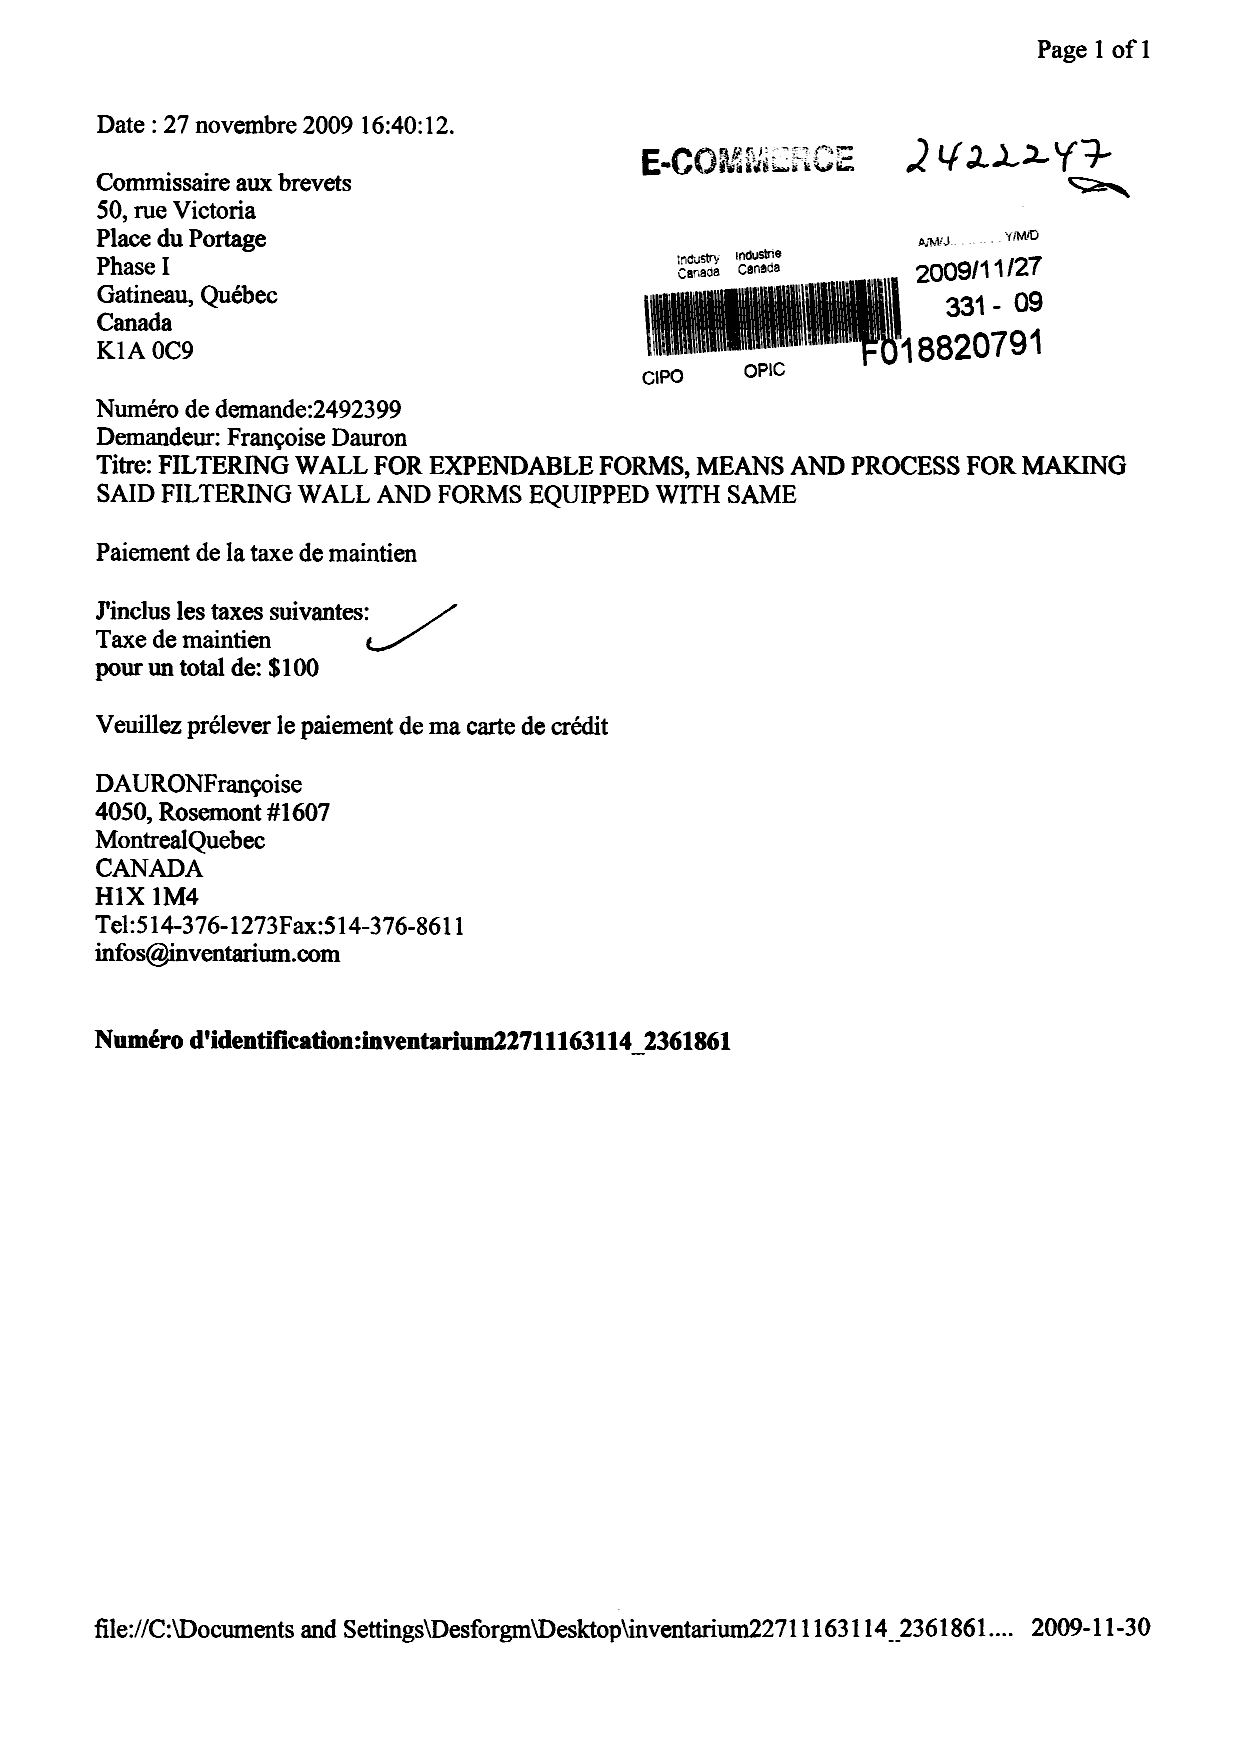 Canadian Patent Document 2492399. Fees 20081227. Image 1 of 1